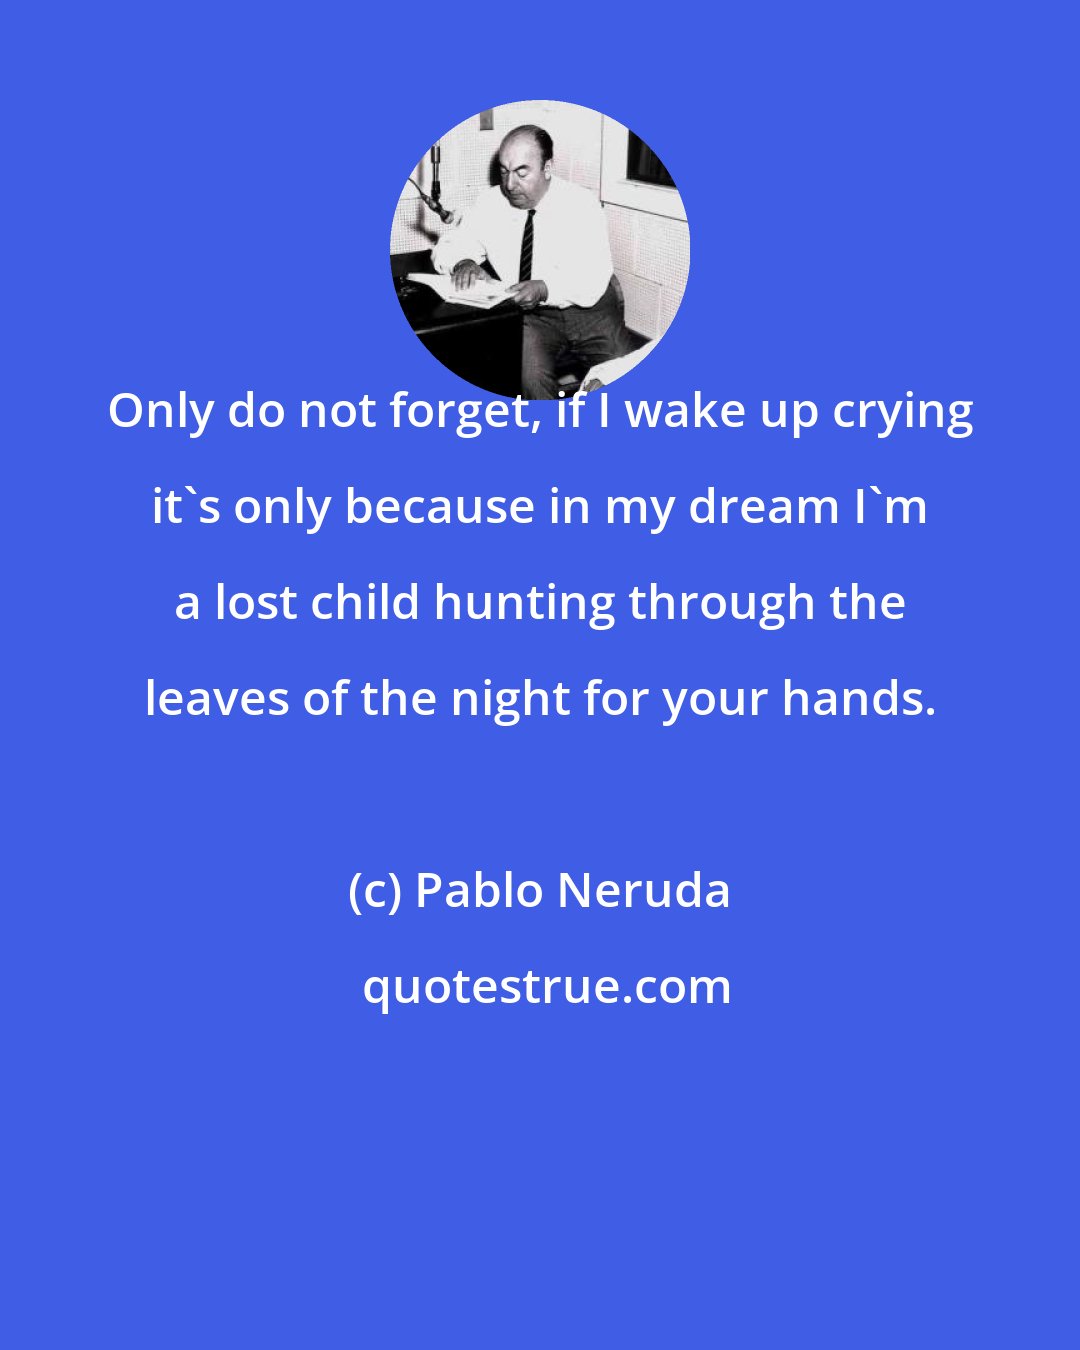 Pablo Neruda: Only do not forget, if I wake up crying it's only because in my dream I'm a lost child hunting through the leaves of the night for your hands.